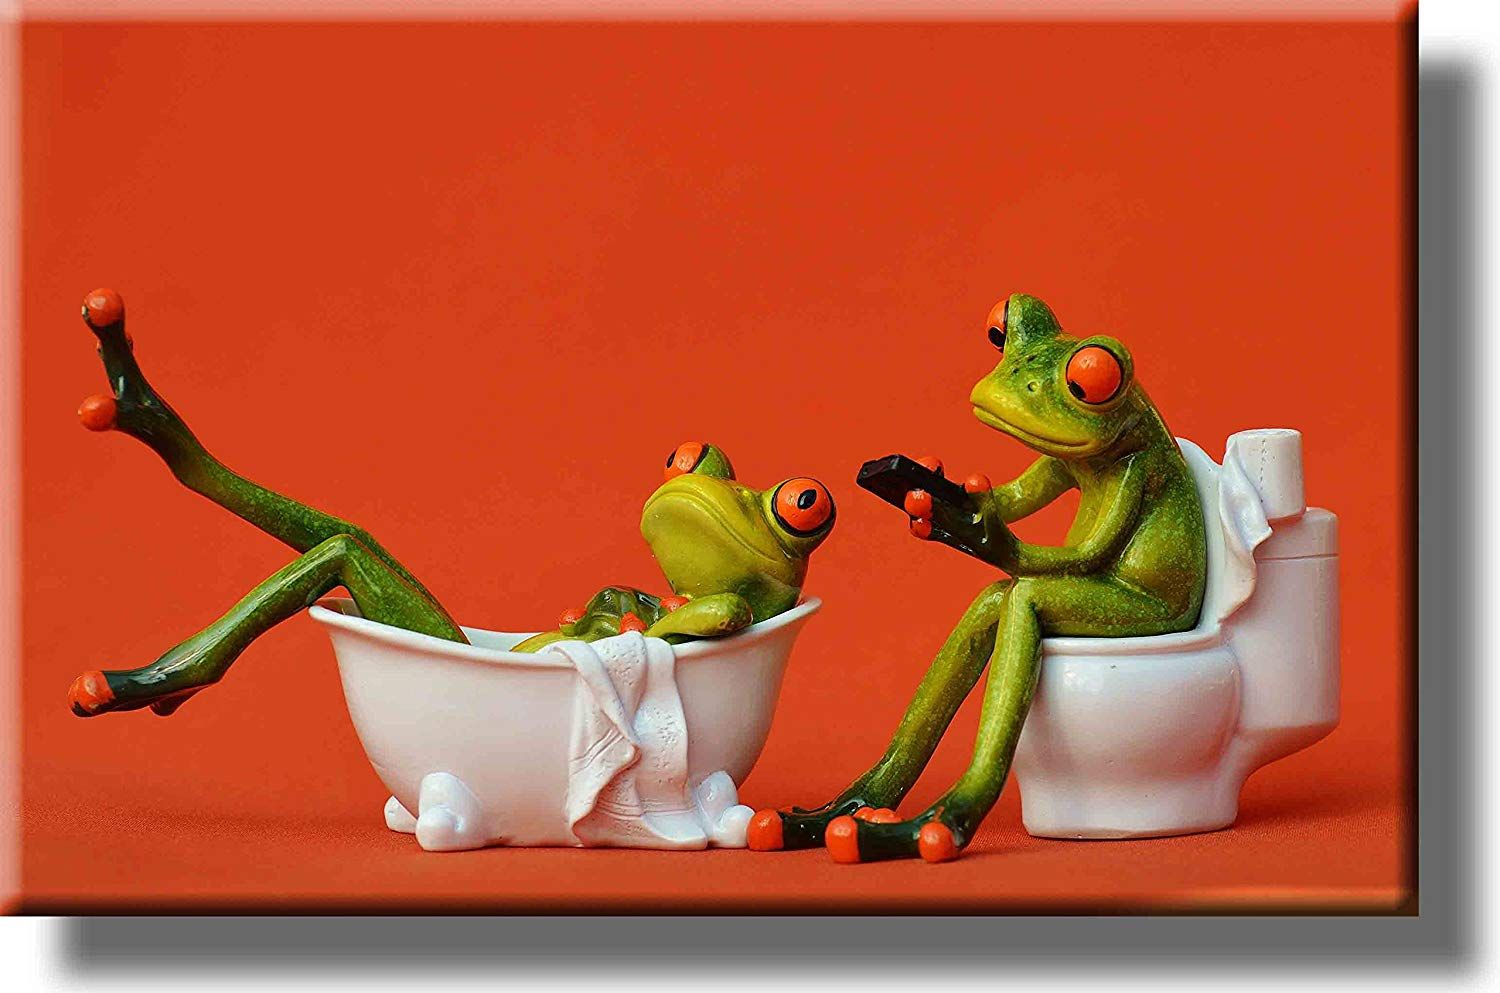 Wall Art Painting On Canvas Frog In Bathroom Wall Decor Funny Frog Painting  For Livingroom Bedroom Decoration Framed Painting Ready To Hang –  Walmart With Frog Wall Art (View 9 of 15)